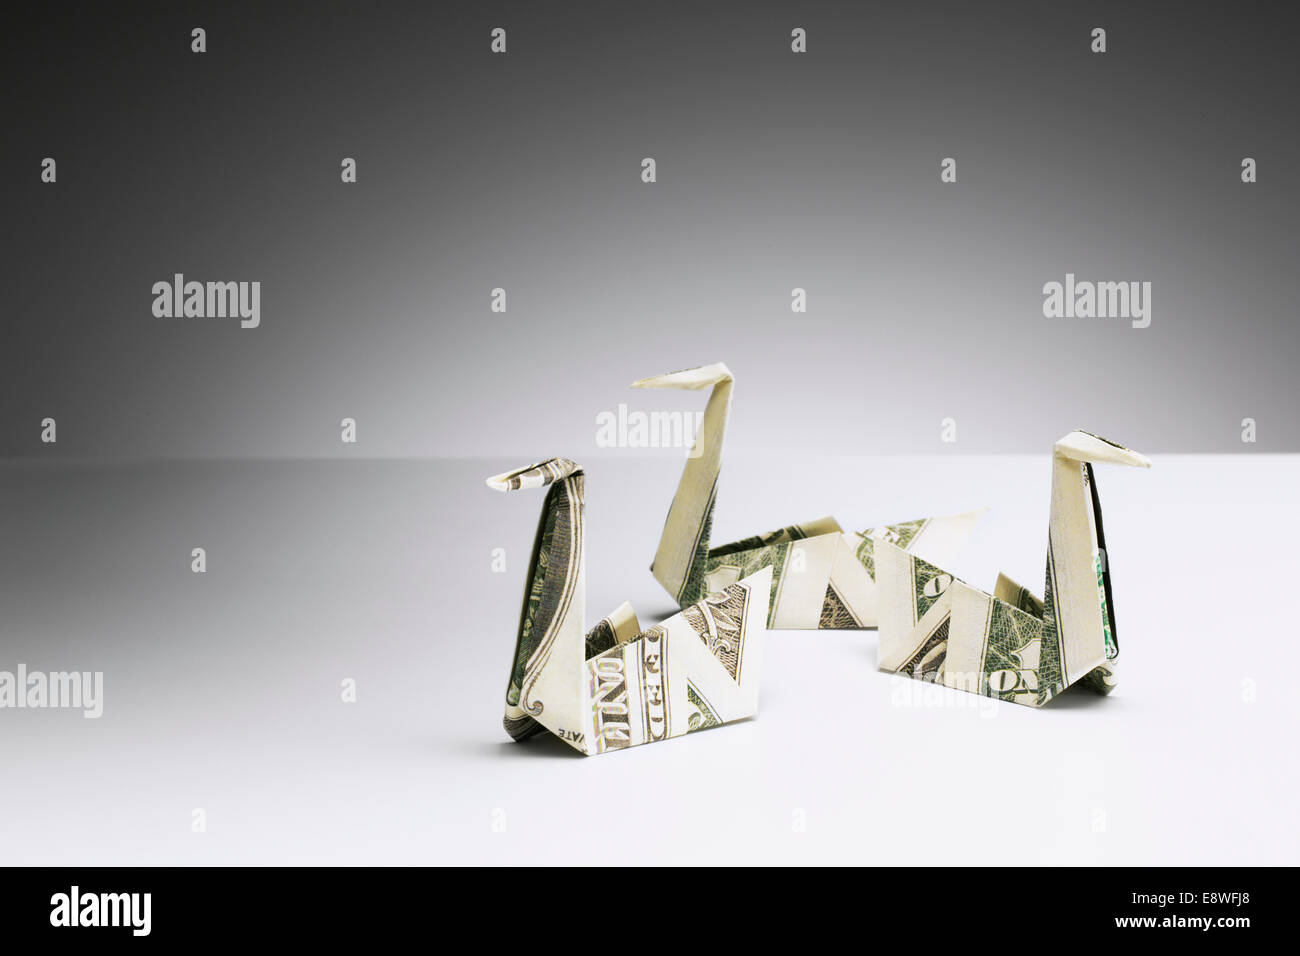 Origami swans made of dollar bills on counter Stock Photo